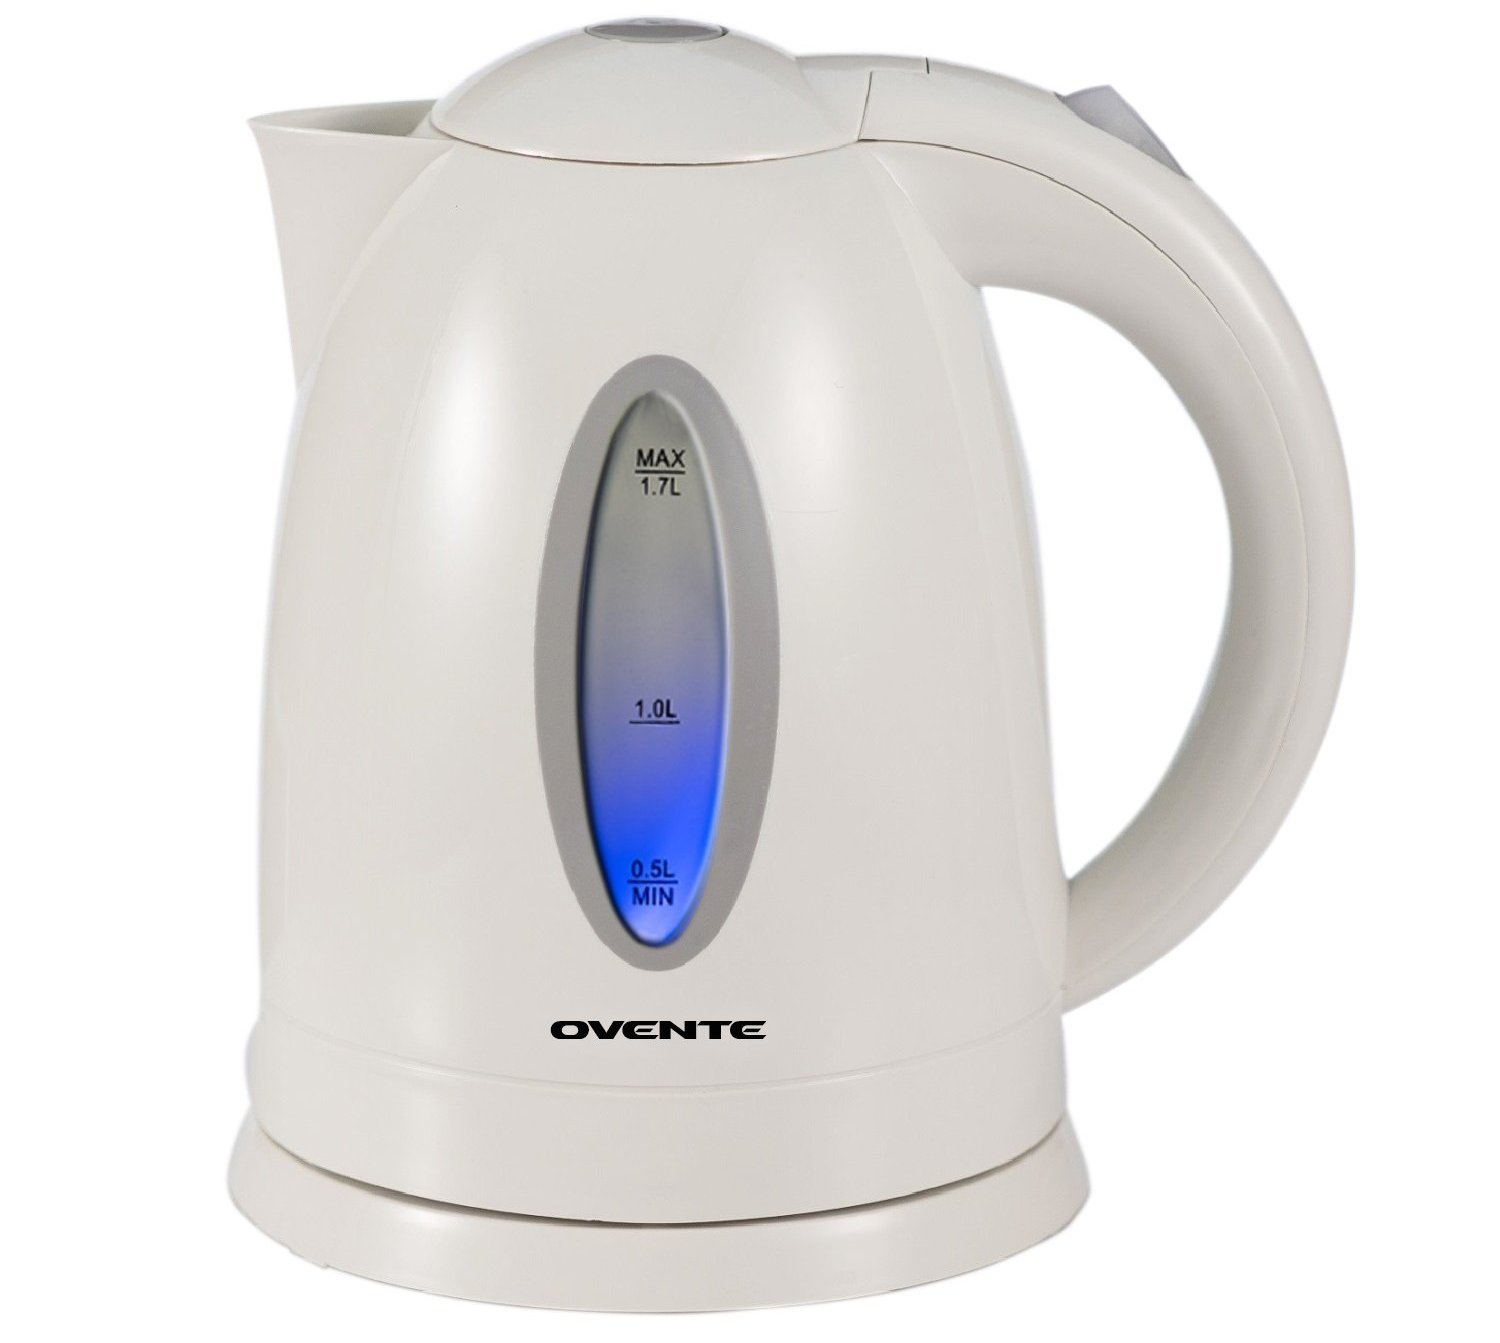 https://9to5toys.com/wp-content/uploads/sites/5/2015/03/ovente-cordless-electric-kettle-kp72w-sale-01.jpg